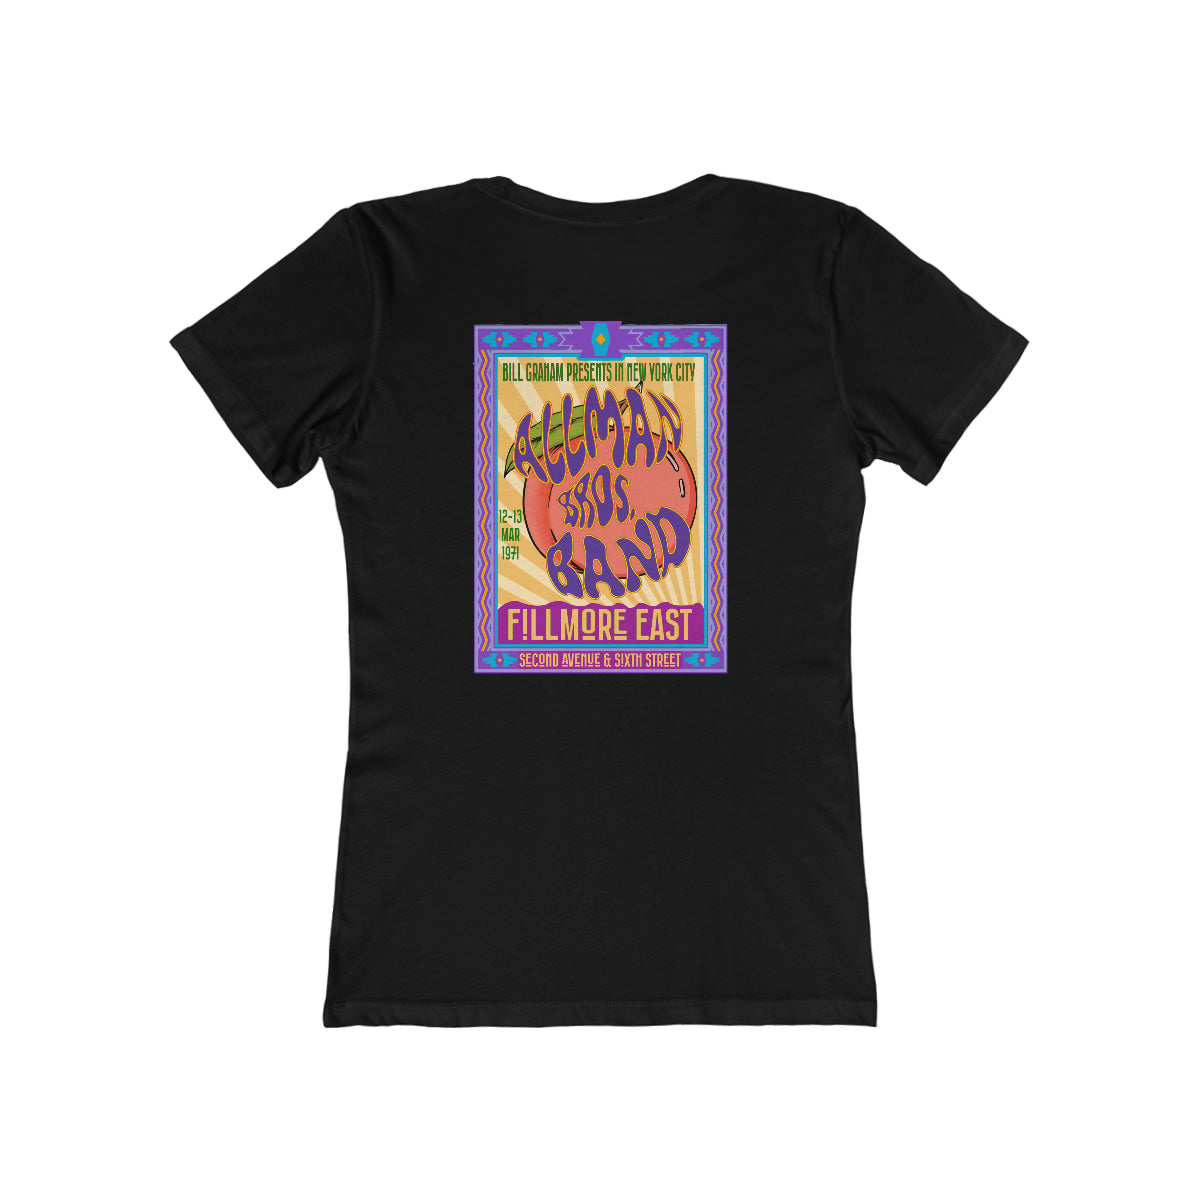 Fillmore East/Allman Bros at the Fillmore - Front/Back Women's T-Shirt